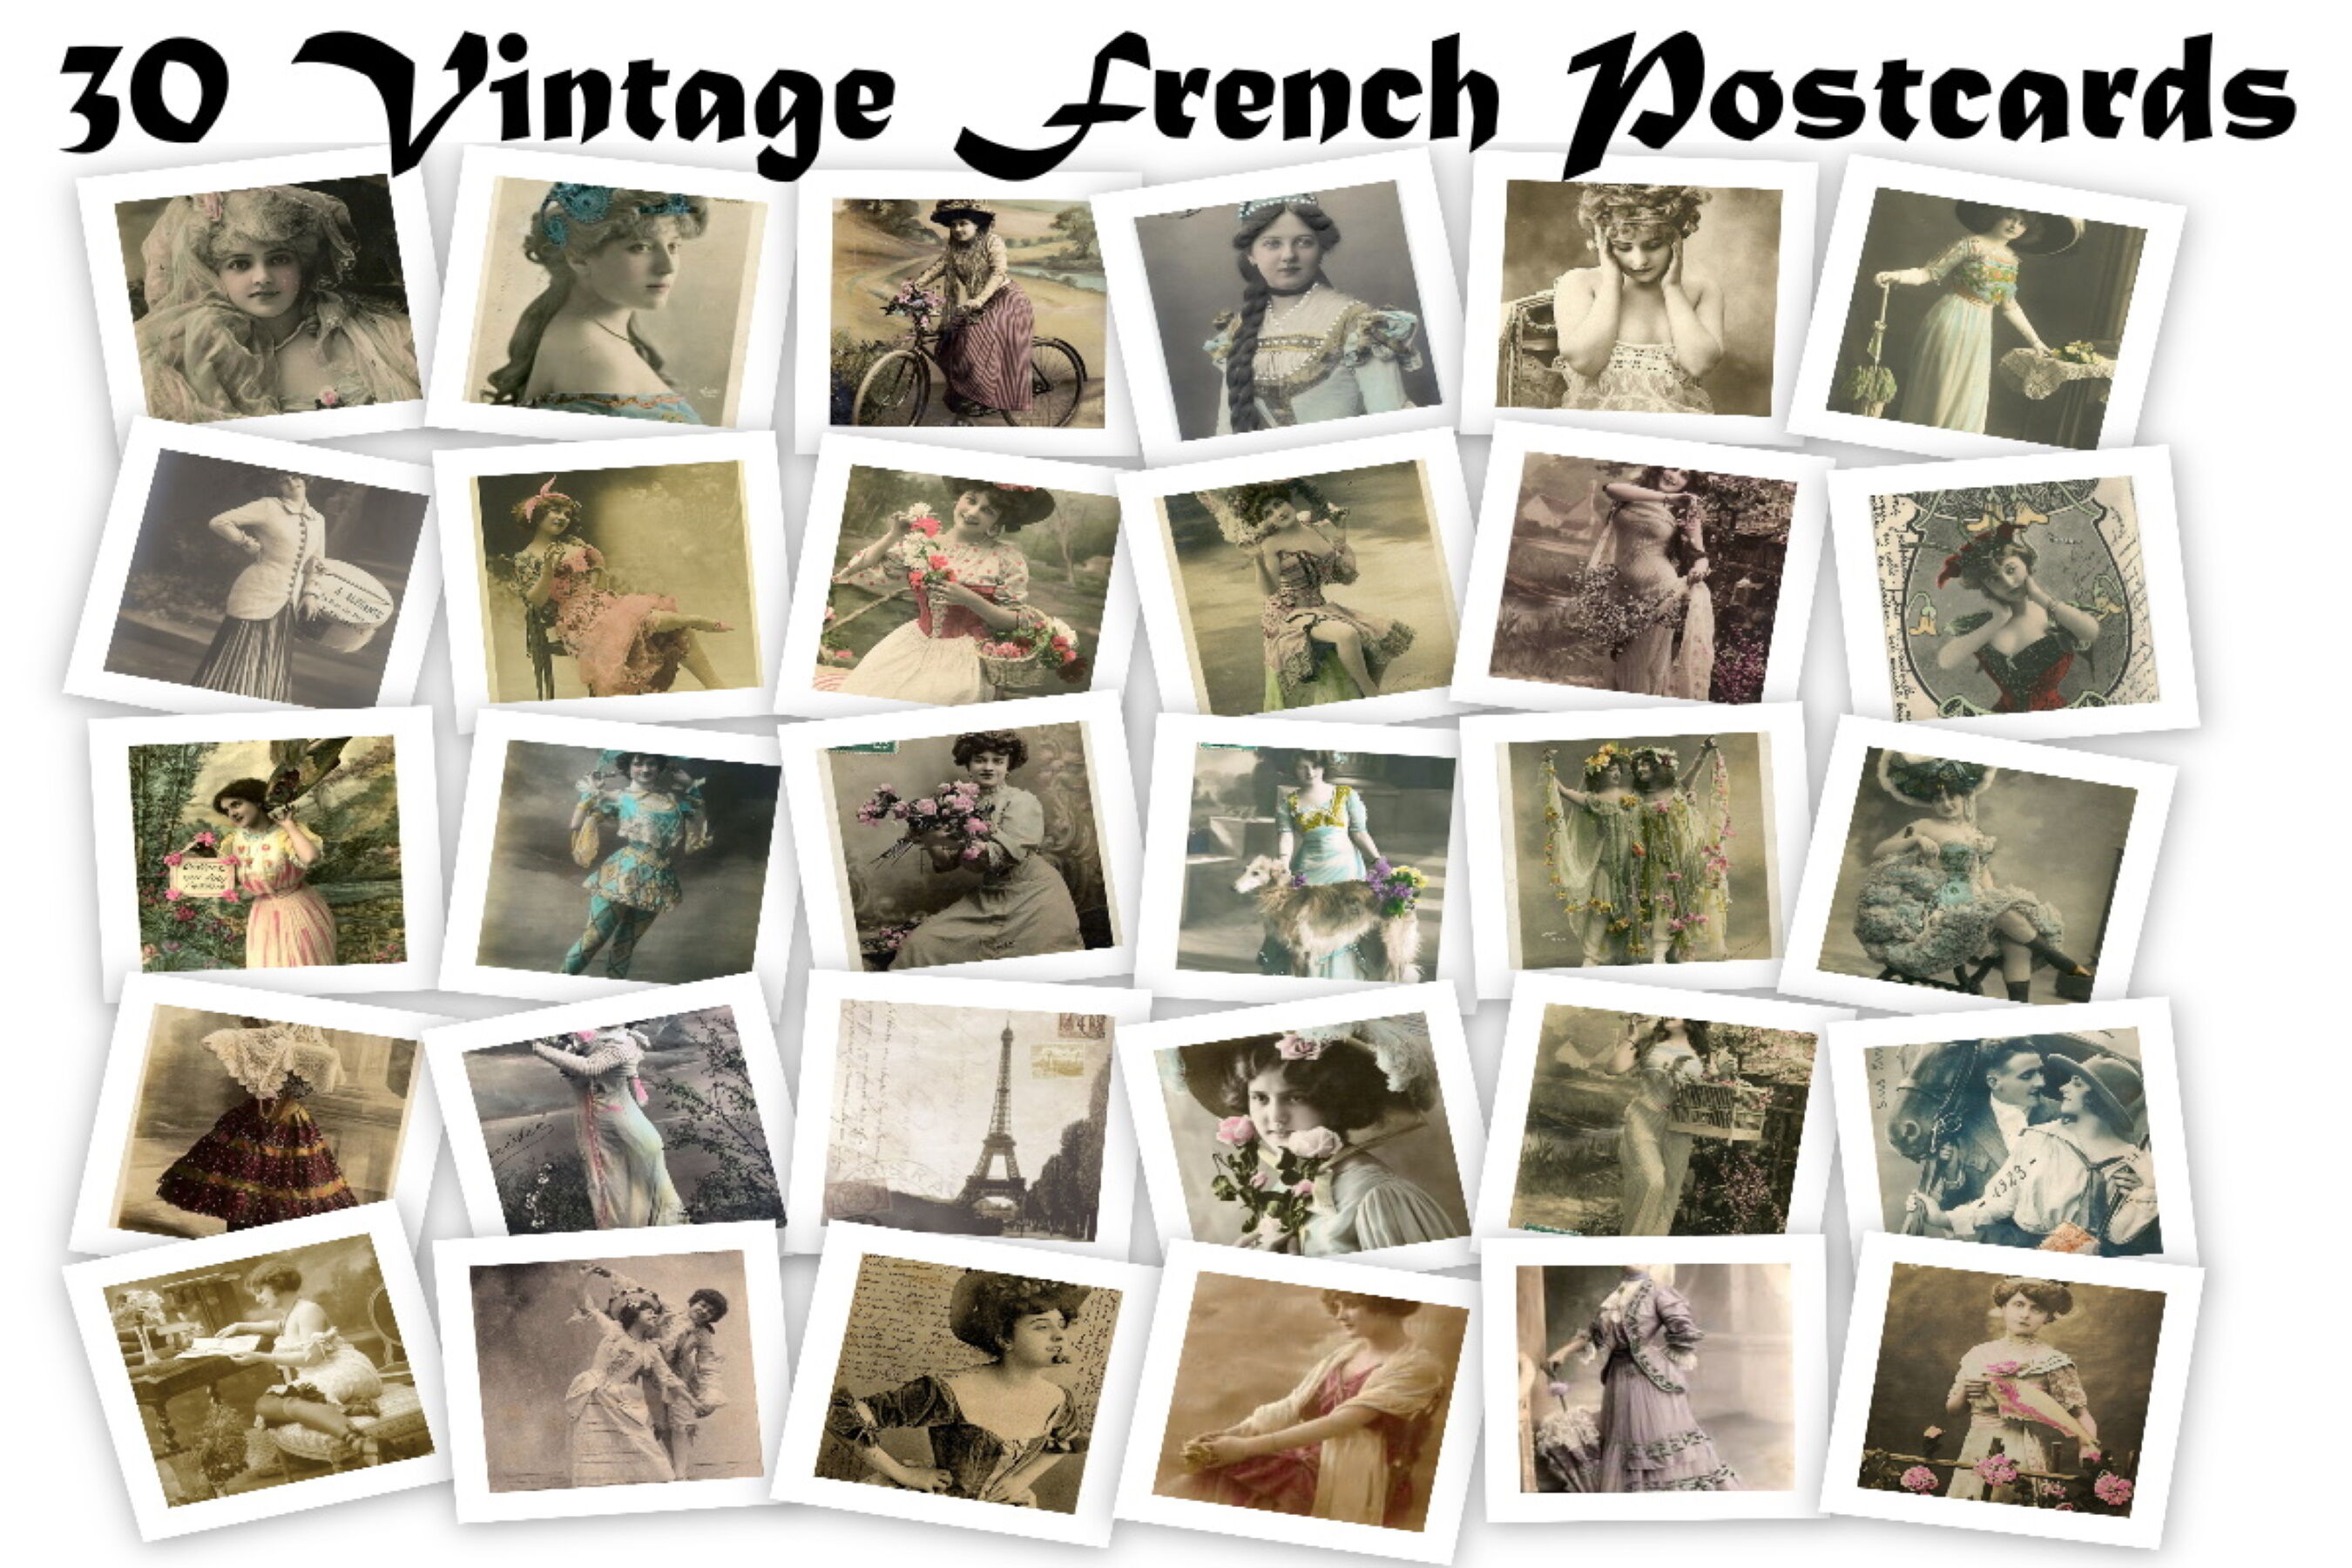 30 Vintage French Postcard Art Images Commercial Use By Scrapbook Attic